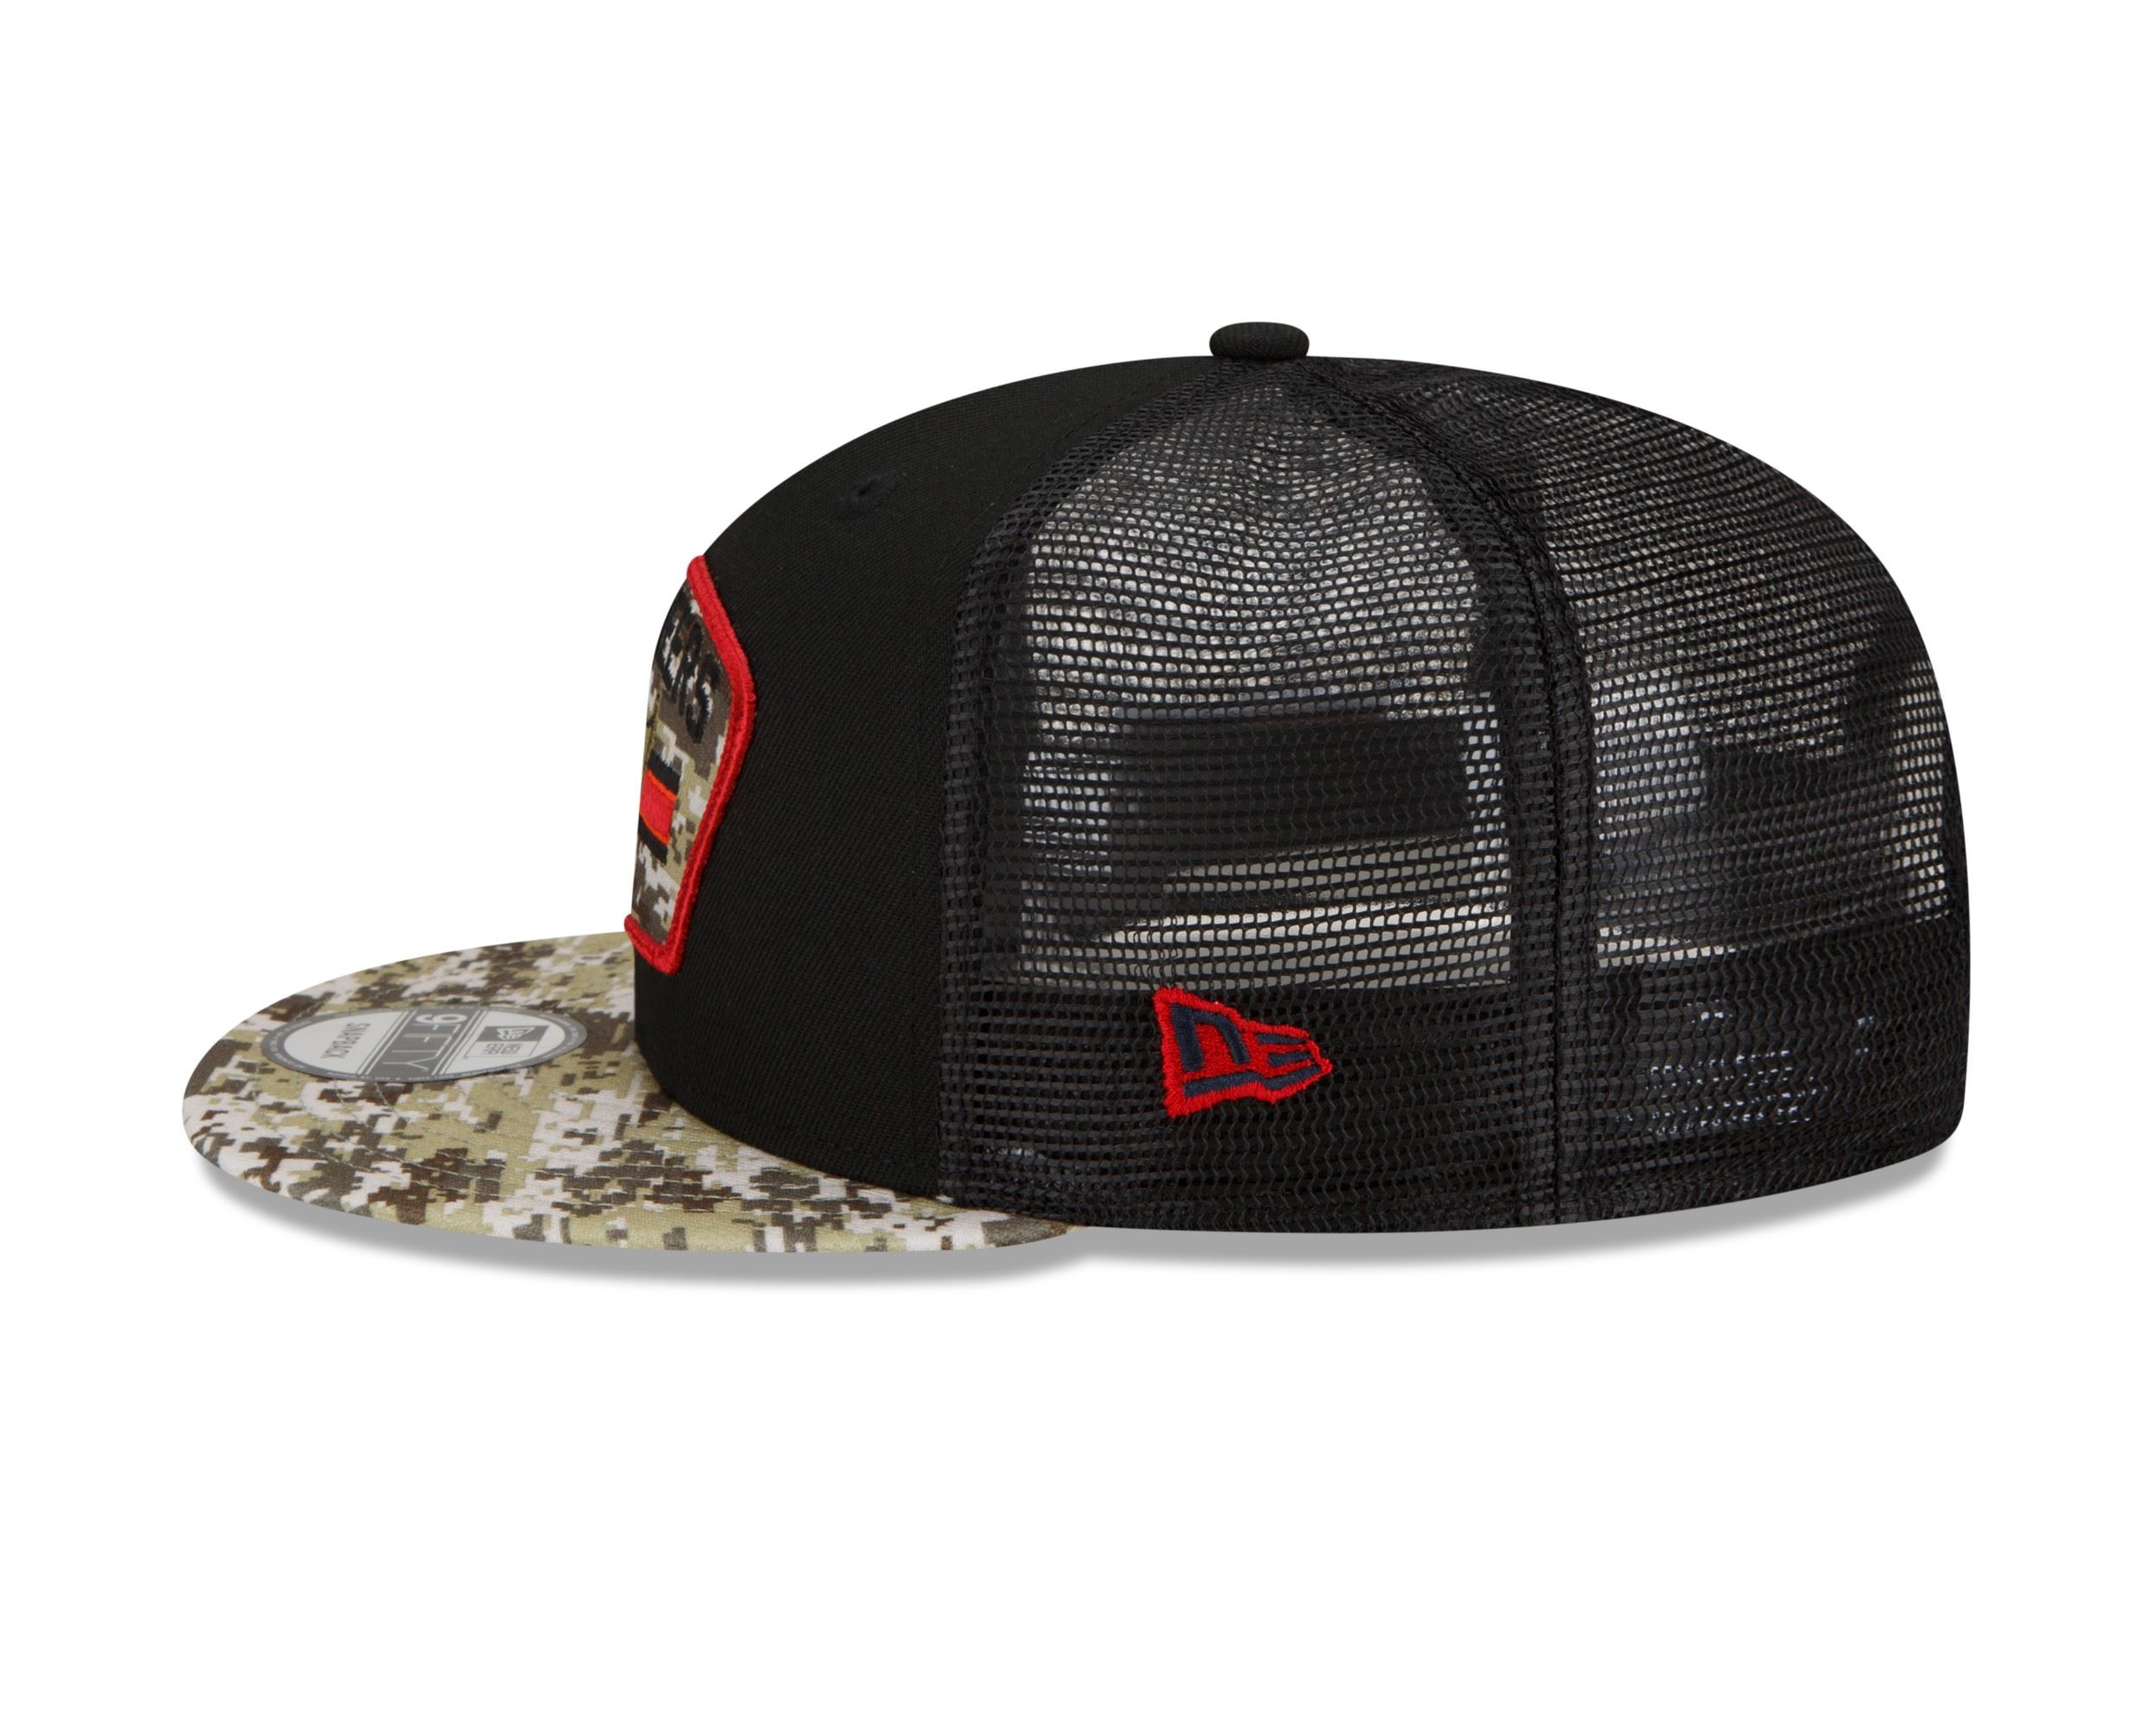 Tampa Bay Buccaneers NFL On Field 2021 Salute to Service Black 9Fifty Kids Snapback Cap New Era